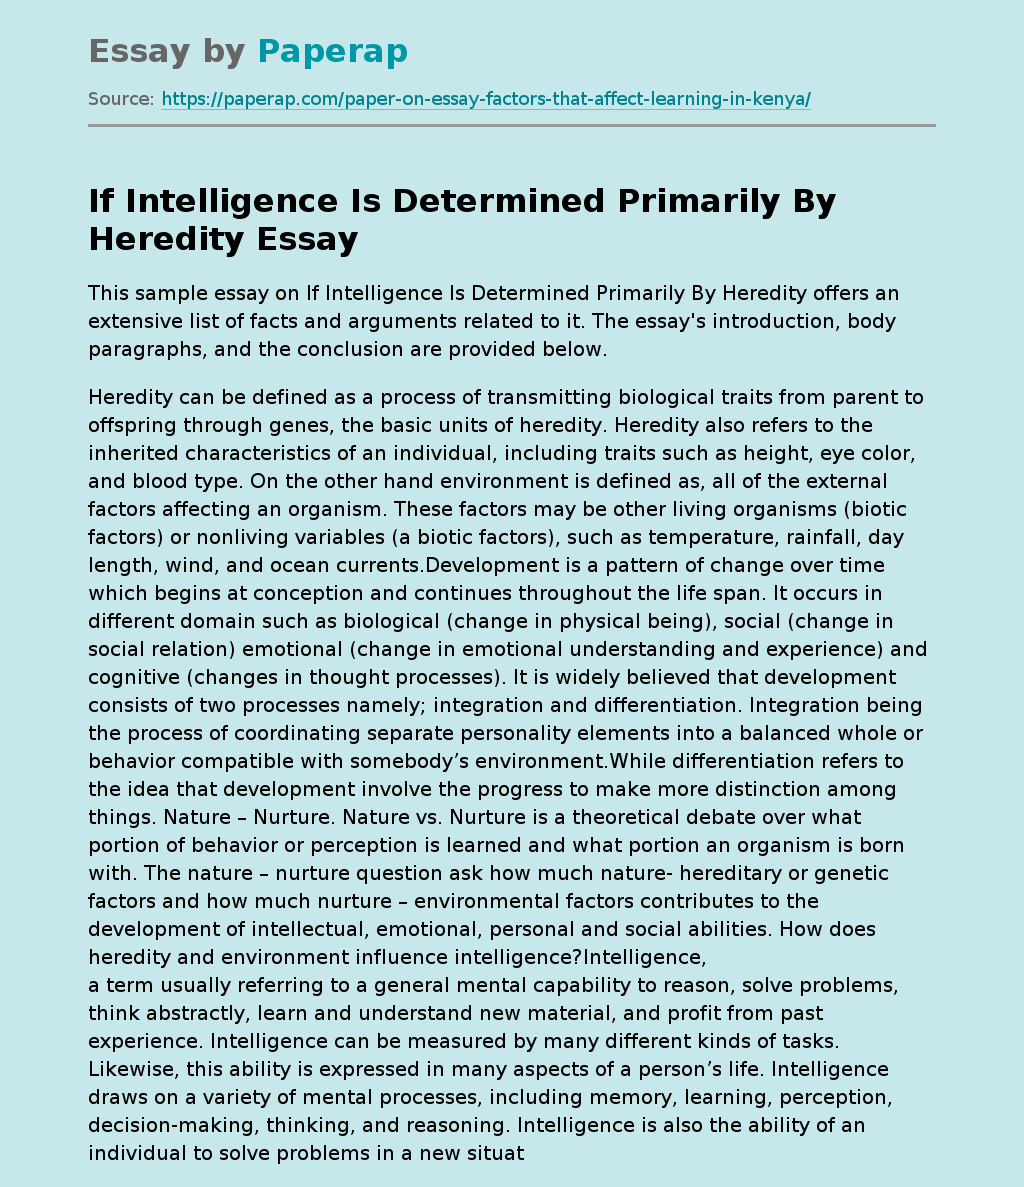 If Intelligence Is Determined Primarily By Heredity